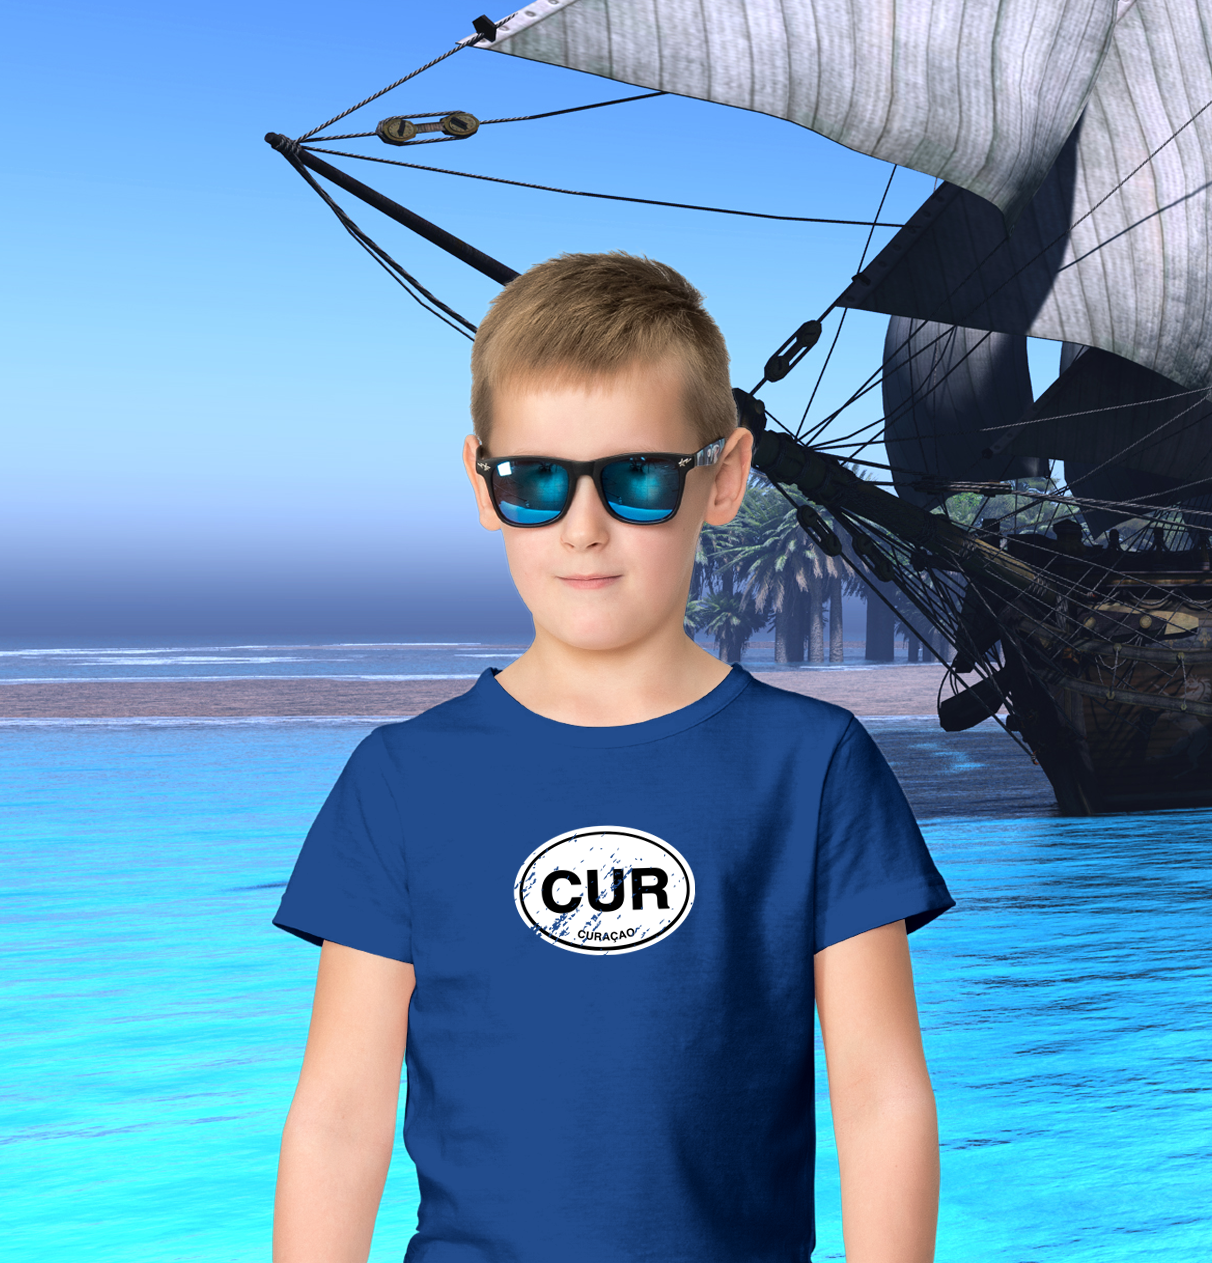 Curacao Classic Youth T-Shirt - My Destination Location